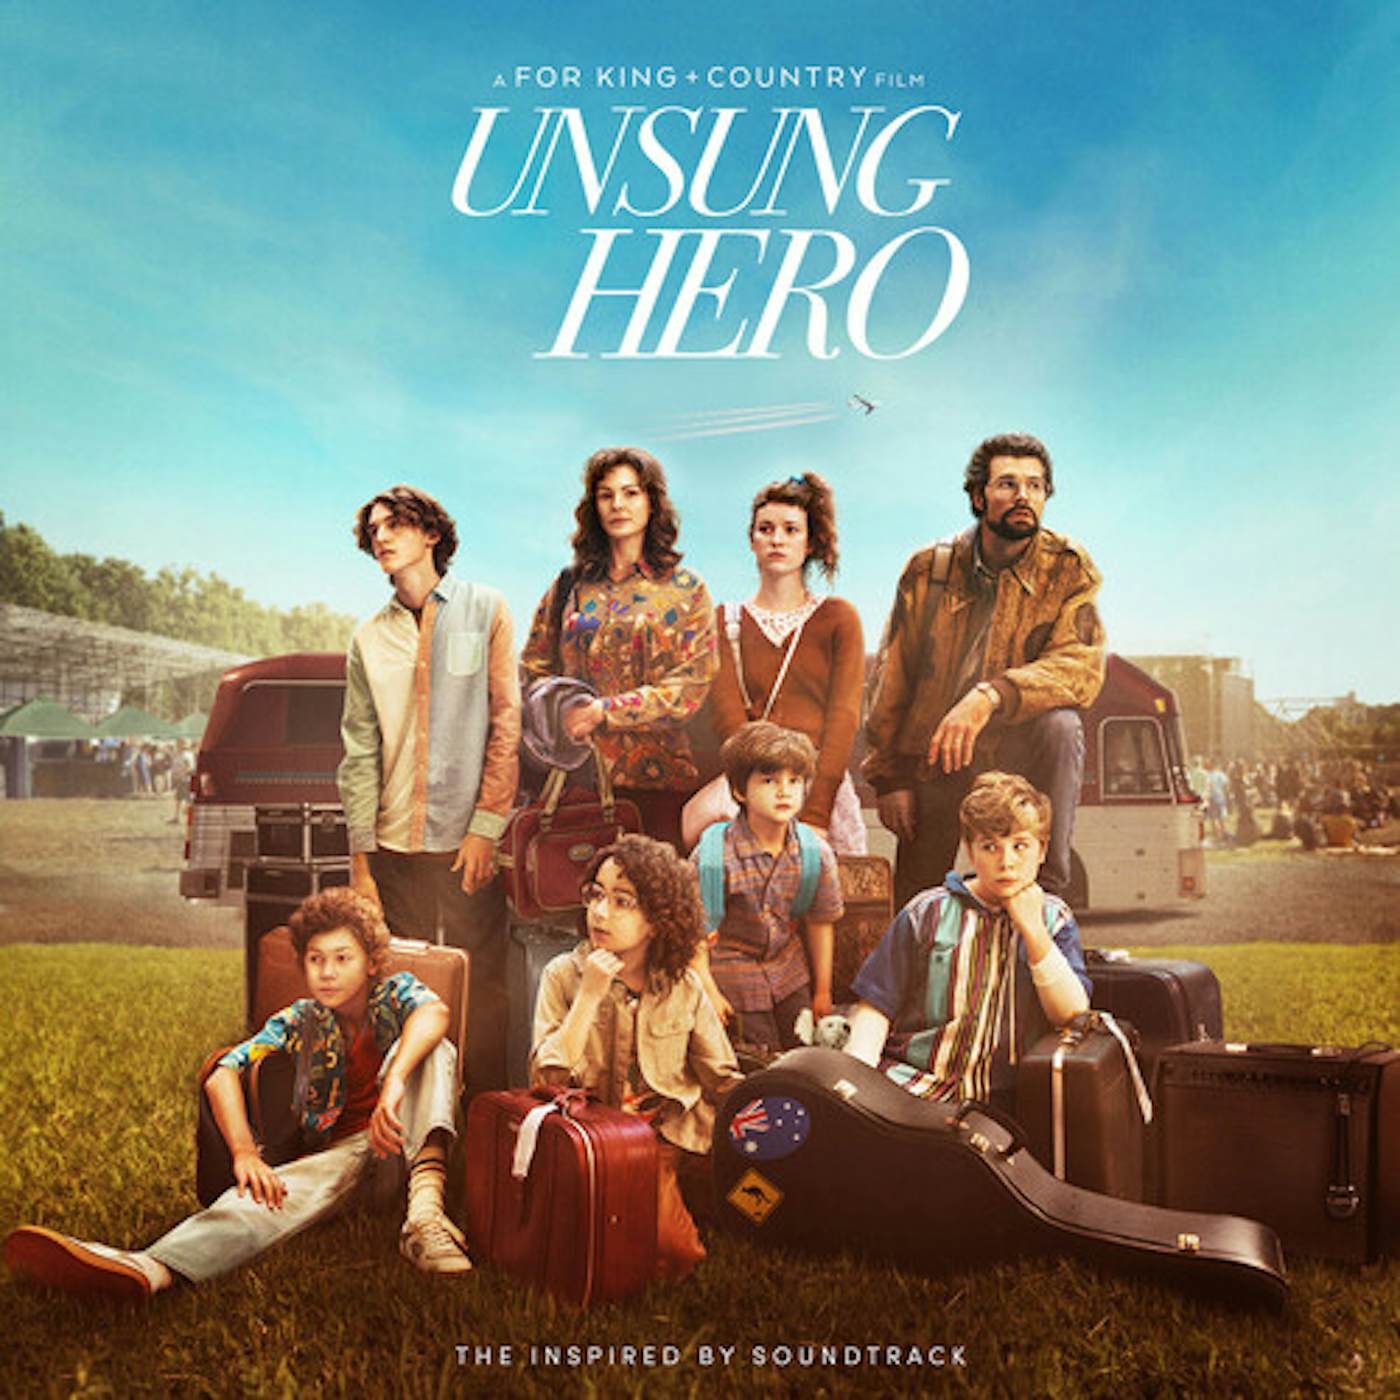 for KING & COUNTRY UNSUNG HERO: THE INSPIRED BY SOUNDTRACK CD